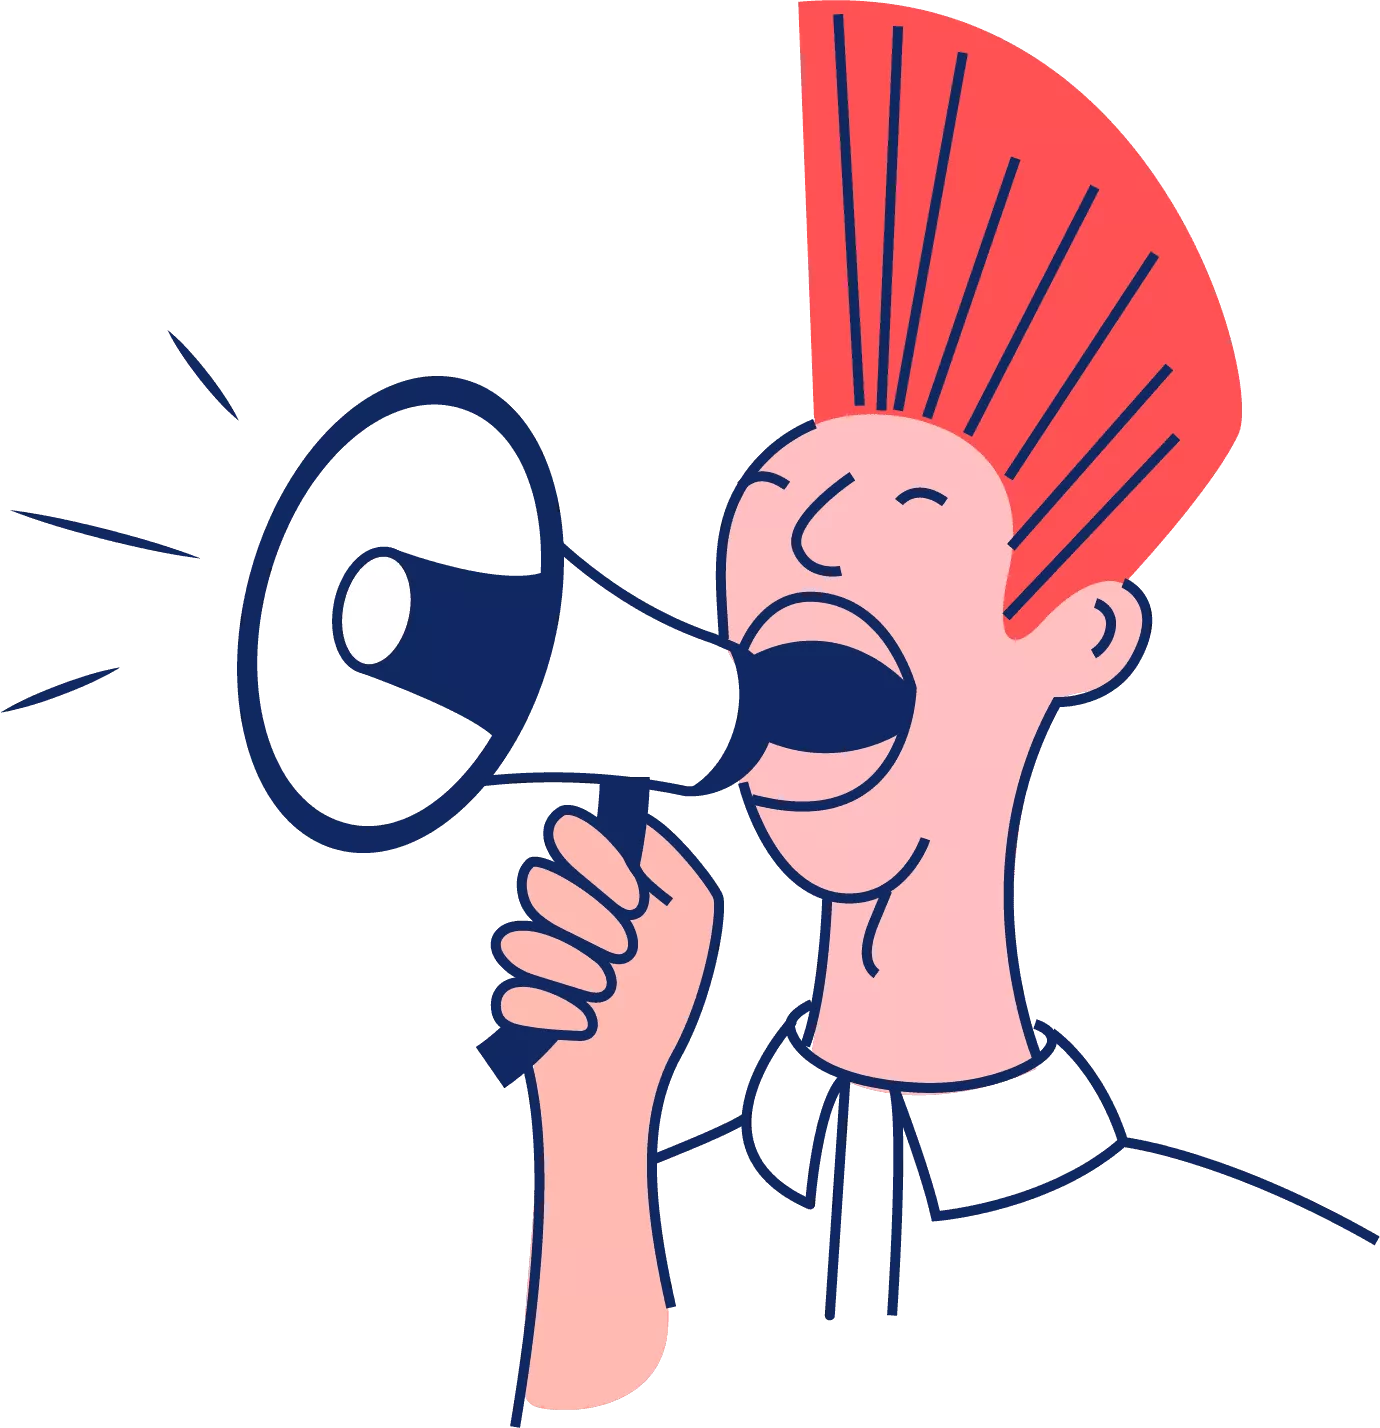 An illustration of a young person shouting through a megaphone